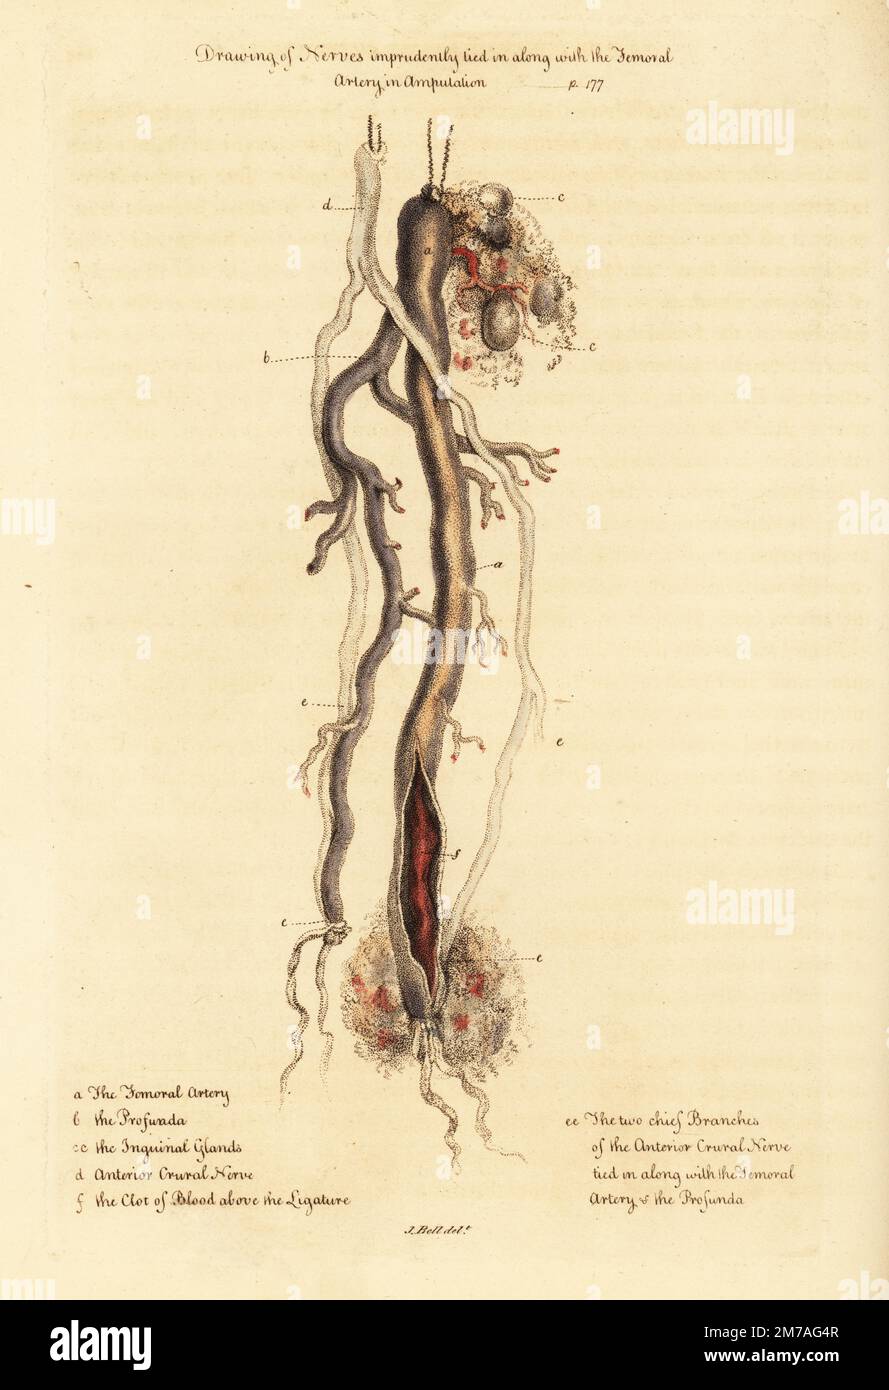 Example of Claude Pouteau's doctrine of tying nerves to arteries in amputations. Drawing of nerves imprudently tied in along with the Femoral Artery in Amputation. Femoral artery a, profunda b, inguinal glands cc, anterior crural nerve d, two chief branches of the anterior crural nerve tied in ee, and clot of blood above the ligature f. Handcoloured copperplate engraving after an illustration by John Bell from his own Principles of Surgery, as they Relate to Wounds, Ulcers and Fistulas, Longman,  Hurst, Rees, Orme and Brown, London, 1815. Stock Photo